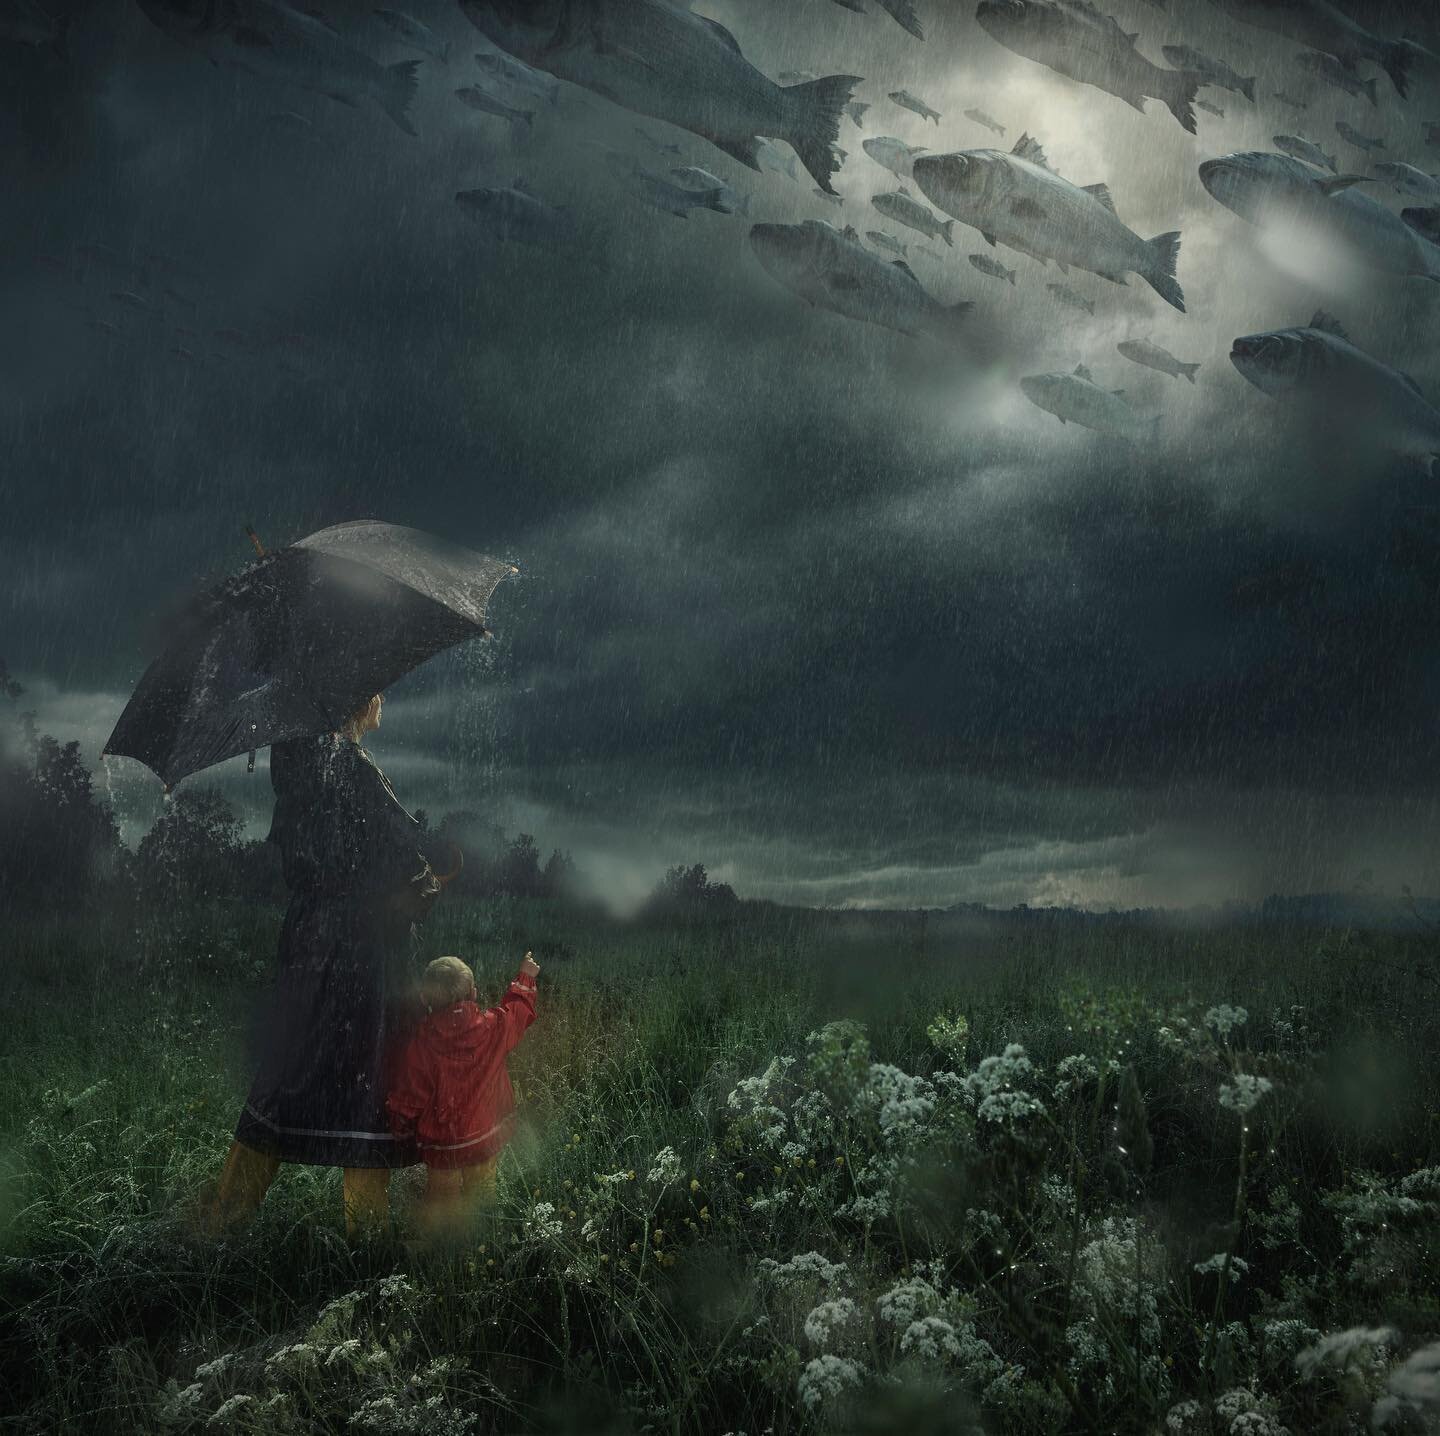 &ldquo;Lost in the Rain, 2016&rdquo; 
.
Imagine when it rains so heavily that fish take over the skies. It&rsquo;s a rare phenomena and it&rsquo;s rarely observed by humans.
.
Made in 2016 on a rainy day in Sweden.
.
#lostinntherain #erikjohansson #r